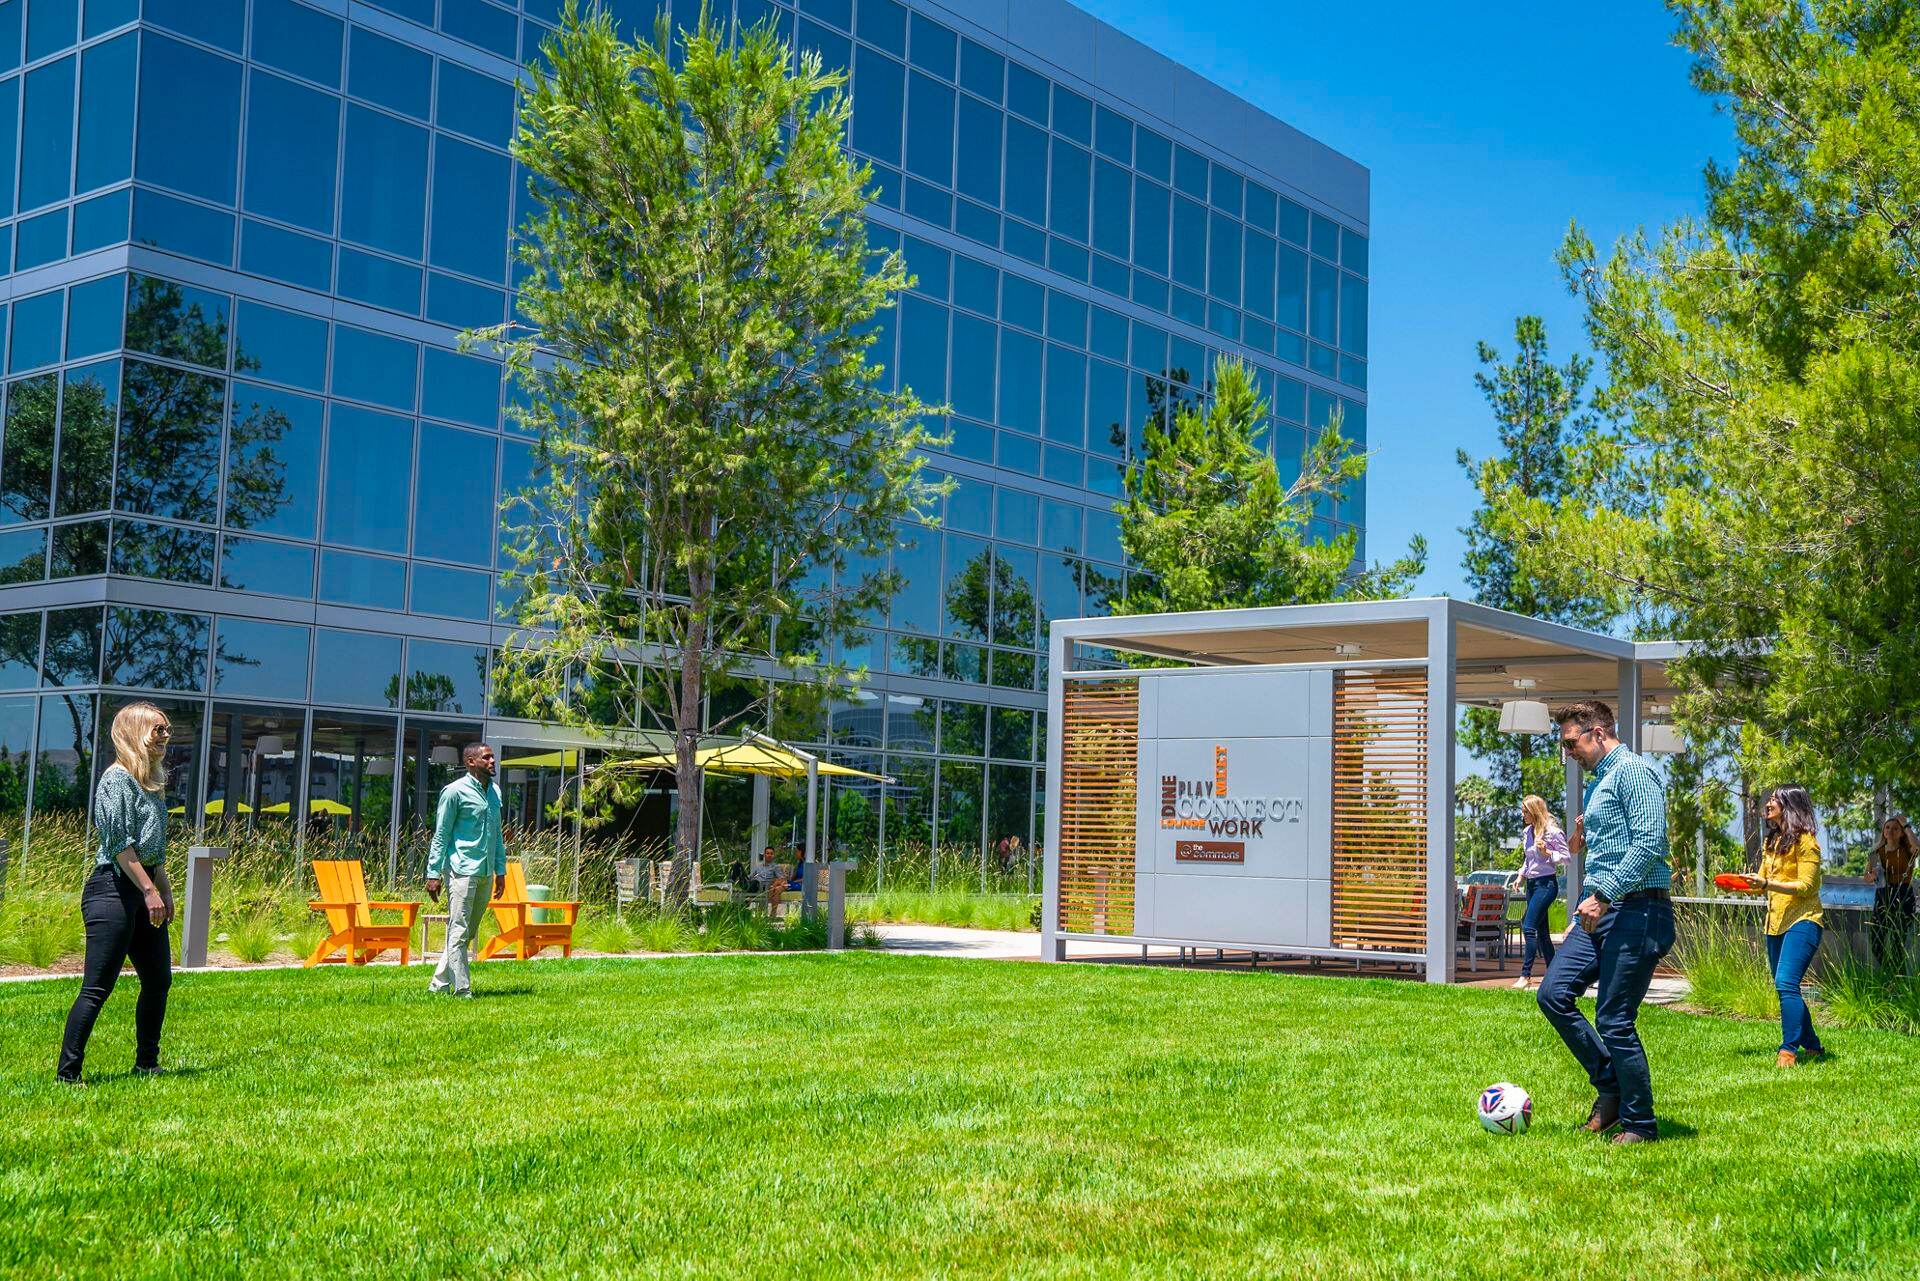 Lifestyle photography of The Commons at Discovery Park between 505 and 525 Technology in Irvine, CA